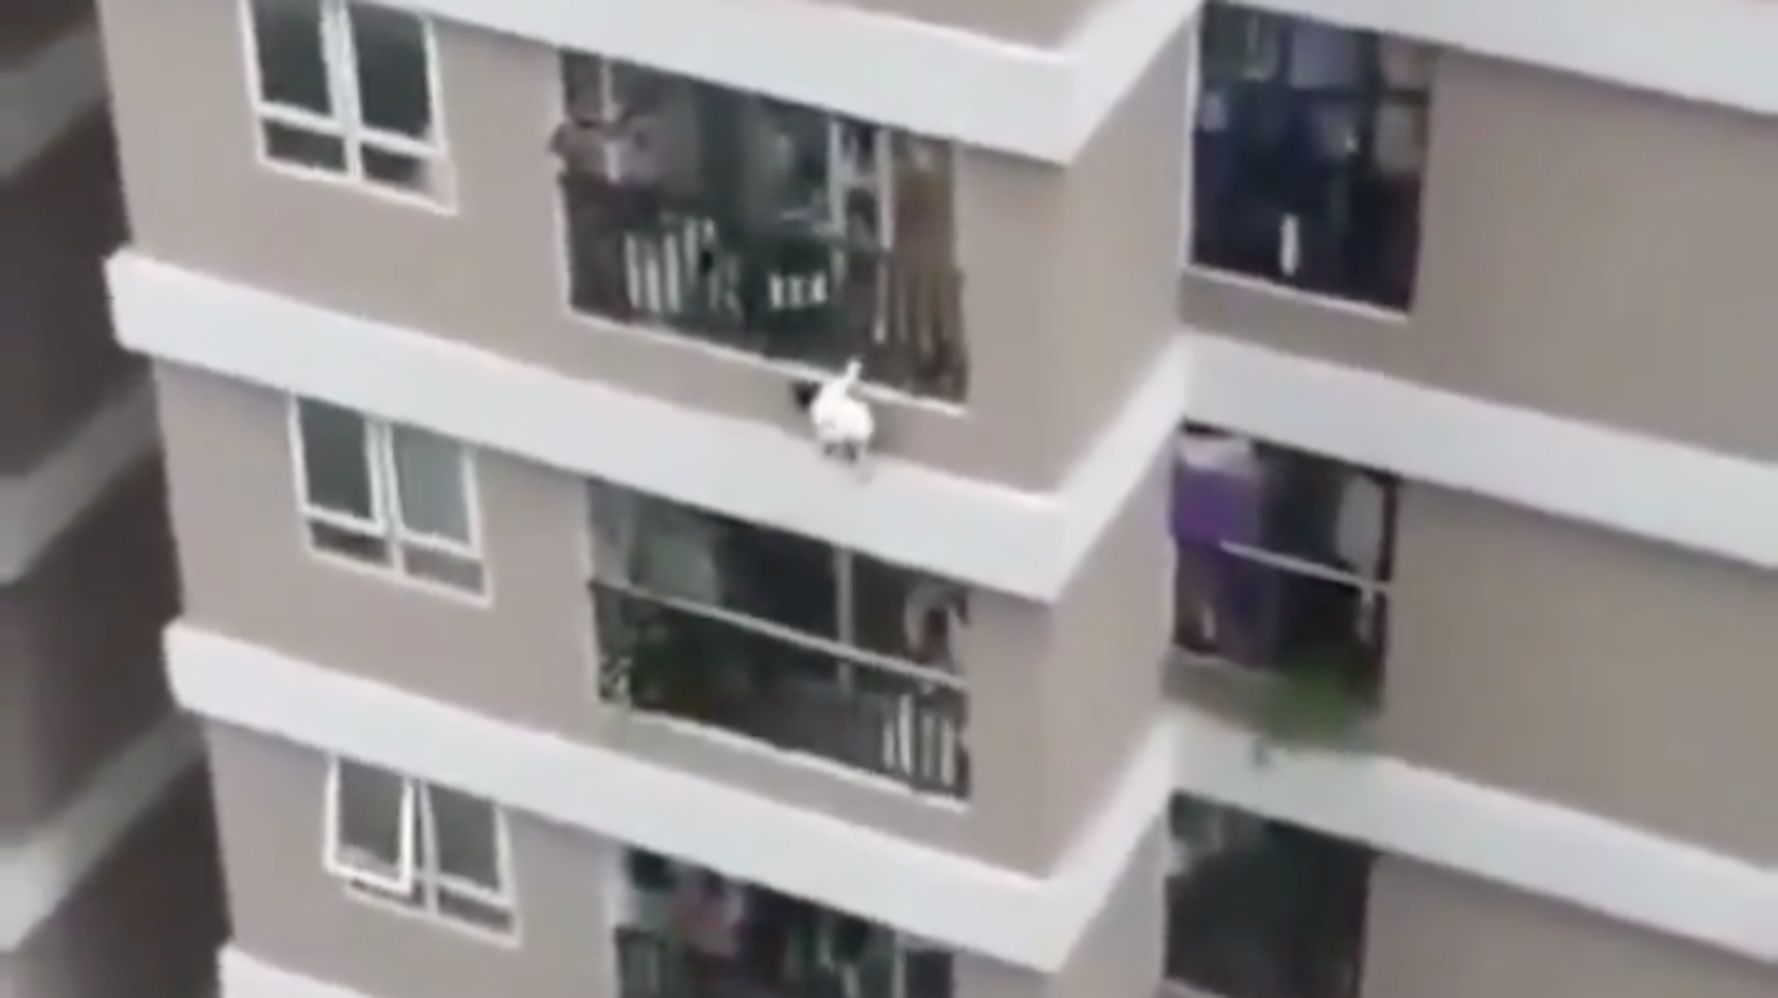 Child survives autumn from 12th-floor balcony thanks to ‘Hero’ delivery driver